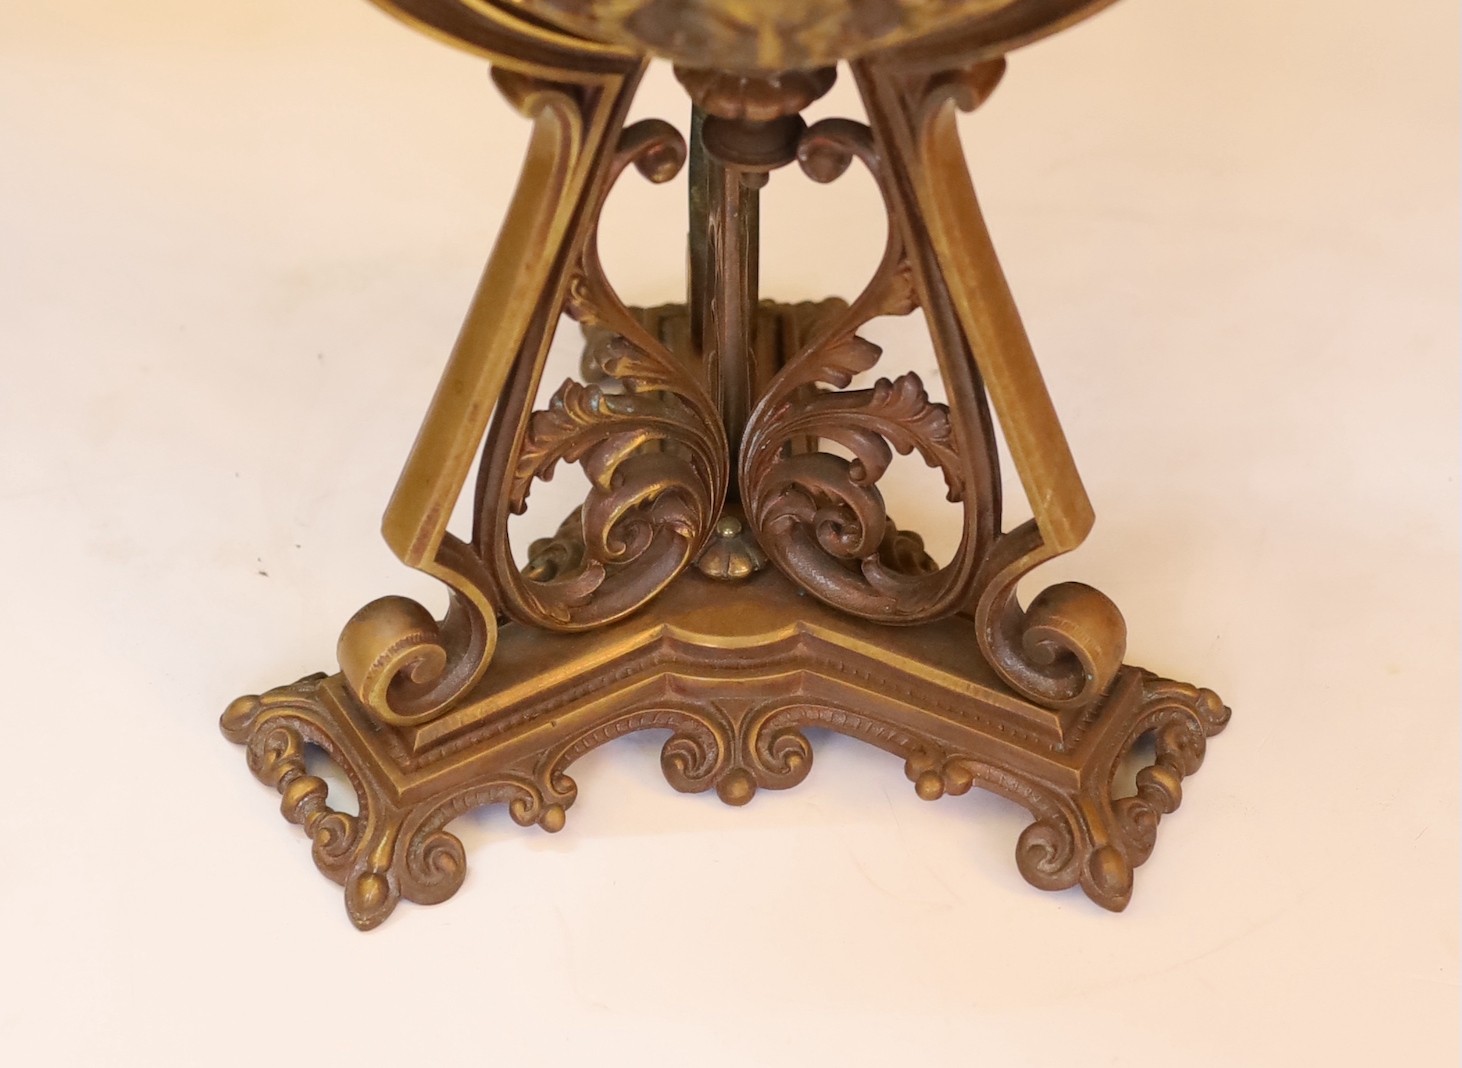 A Victorian bronze Renaissance revival oil lamp, decorated with masks and scrolls, with duplex mechanism, frosted glass shade and flue, height overall 58cm